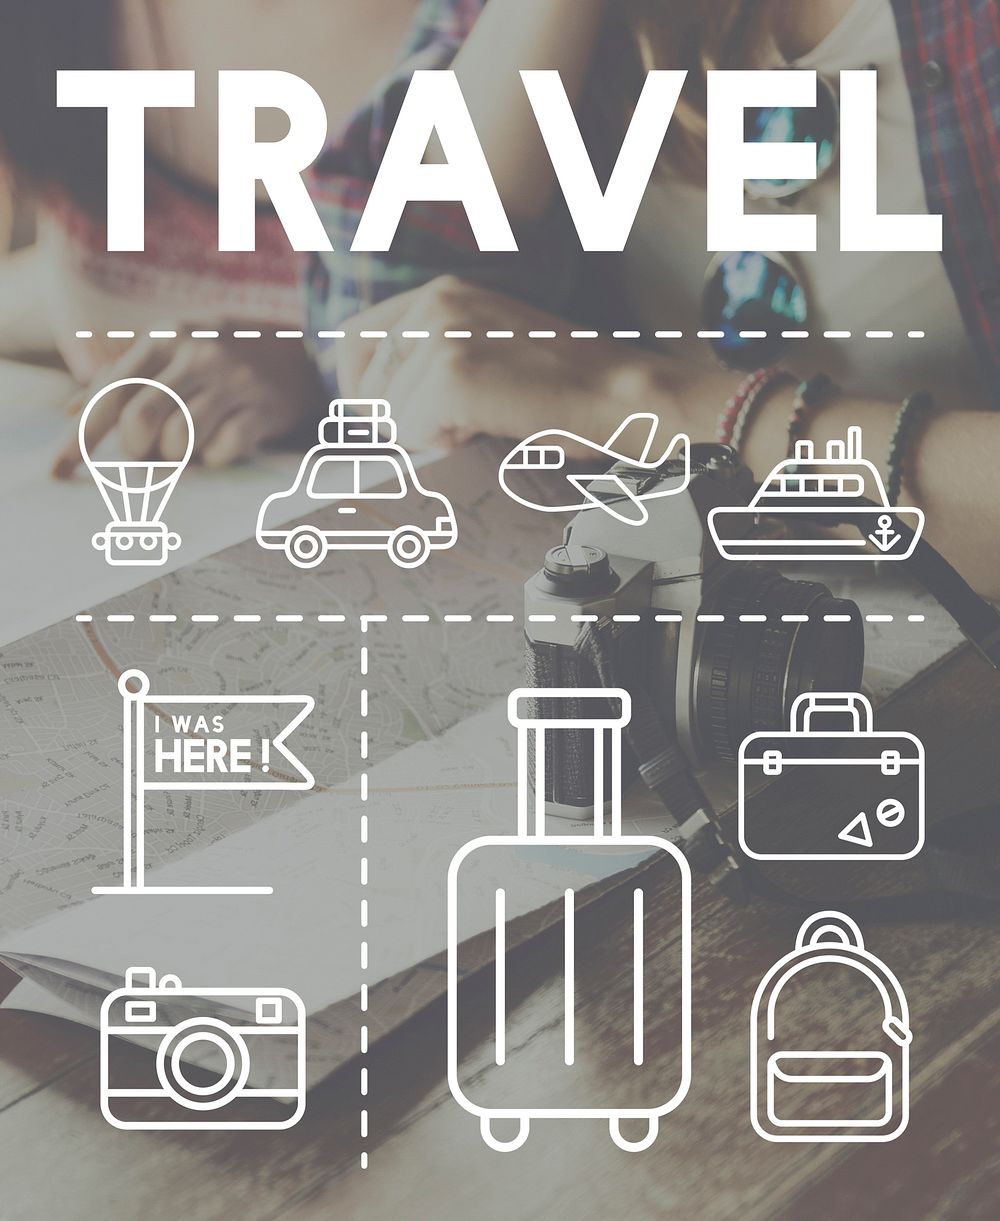 Travel Holiday Journey Exploration Graphic Concept